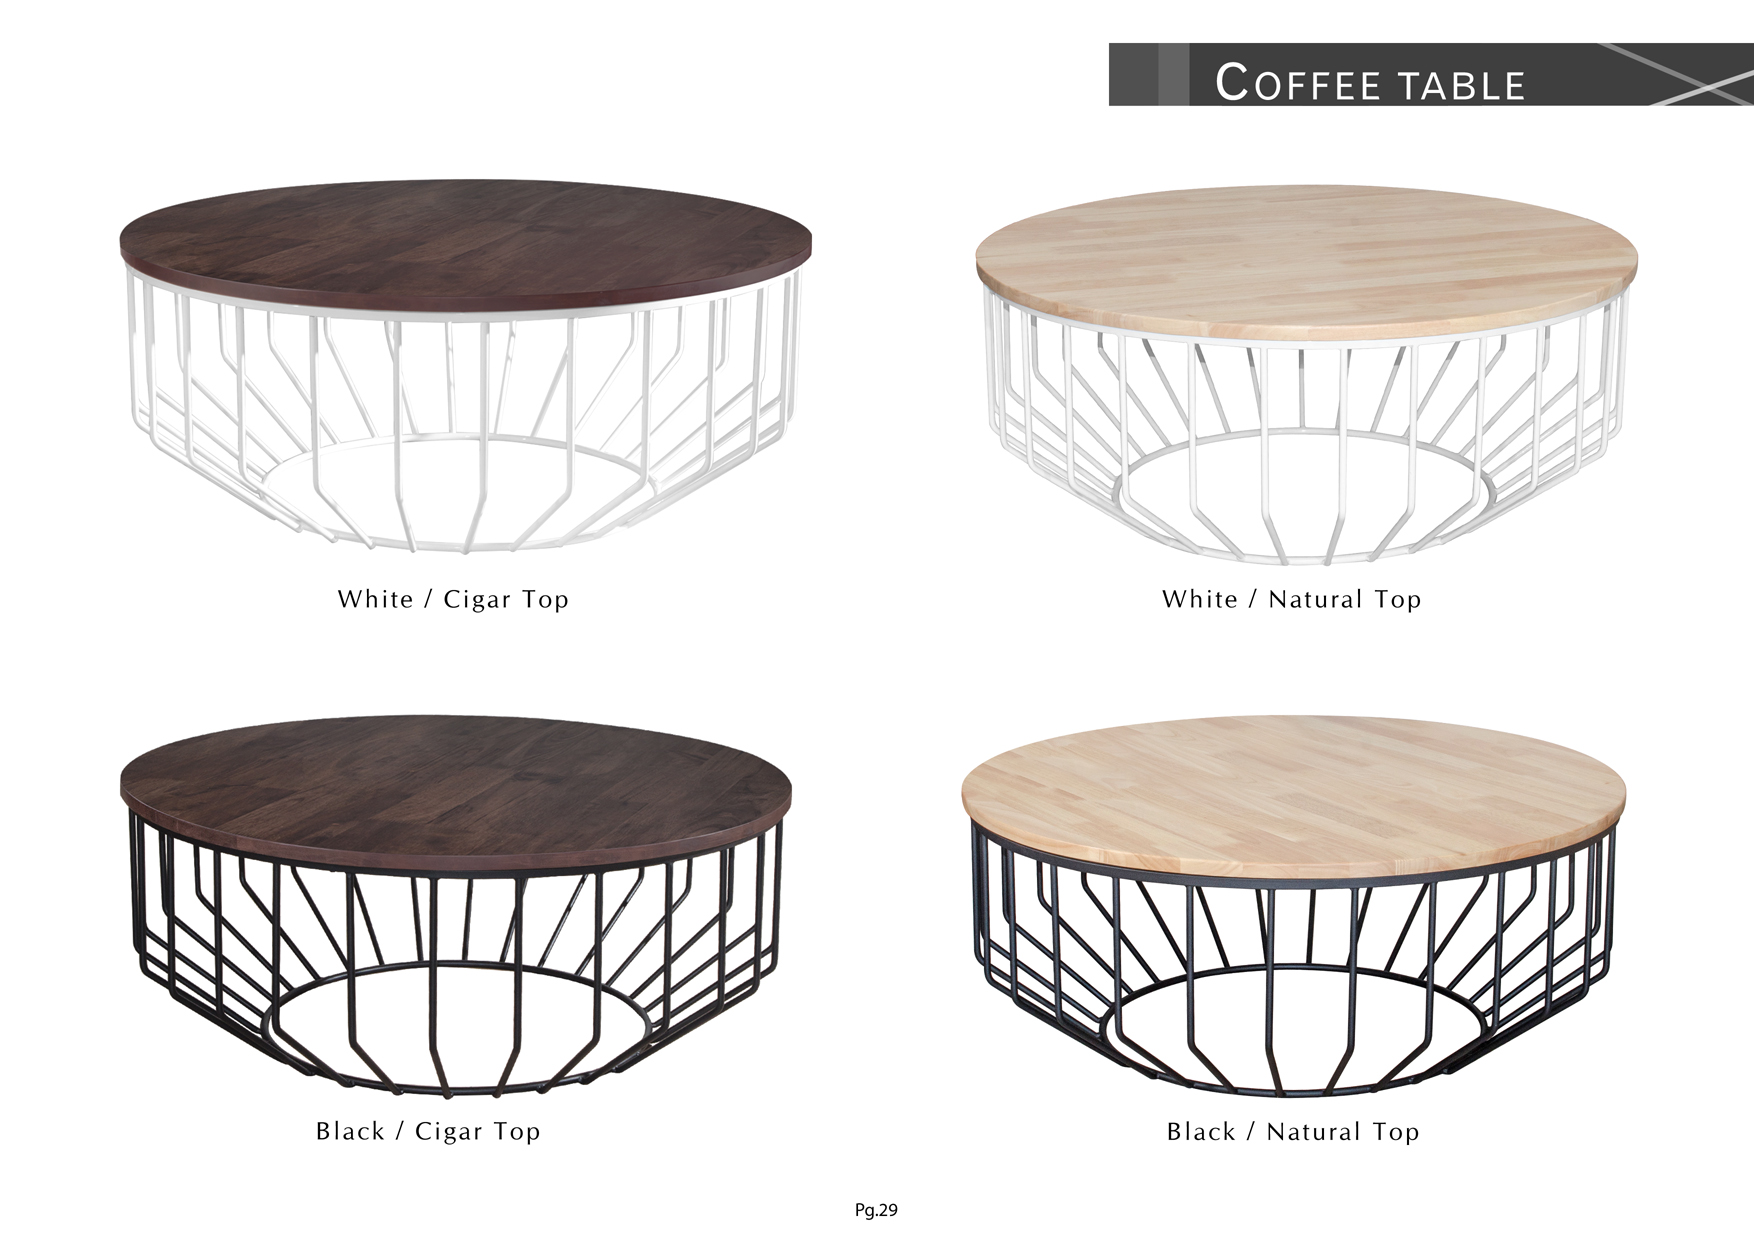 Product: PG29. LIBERLAND COFFEE TABLE